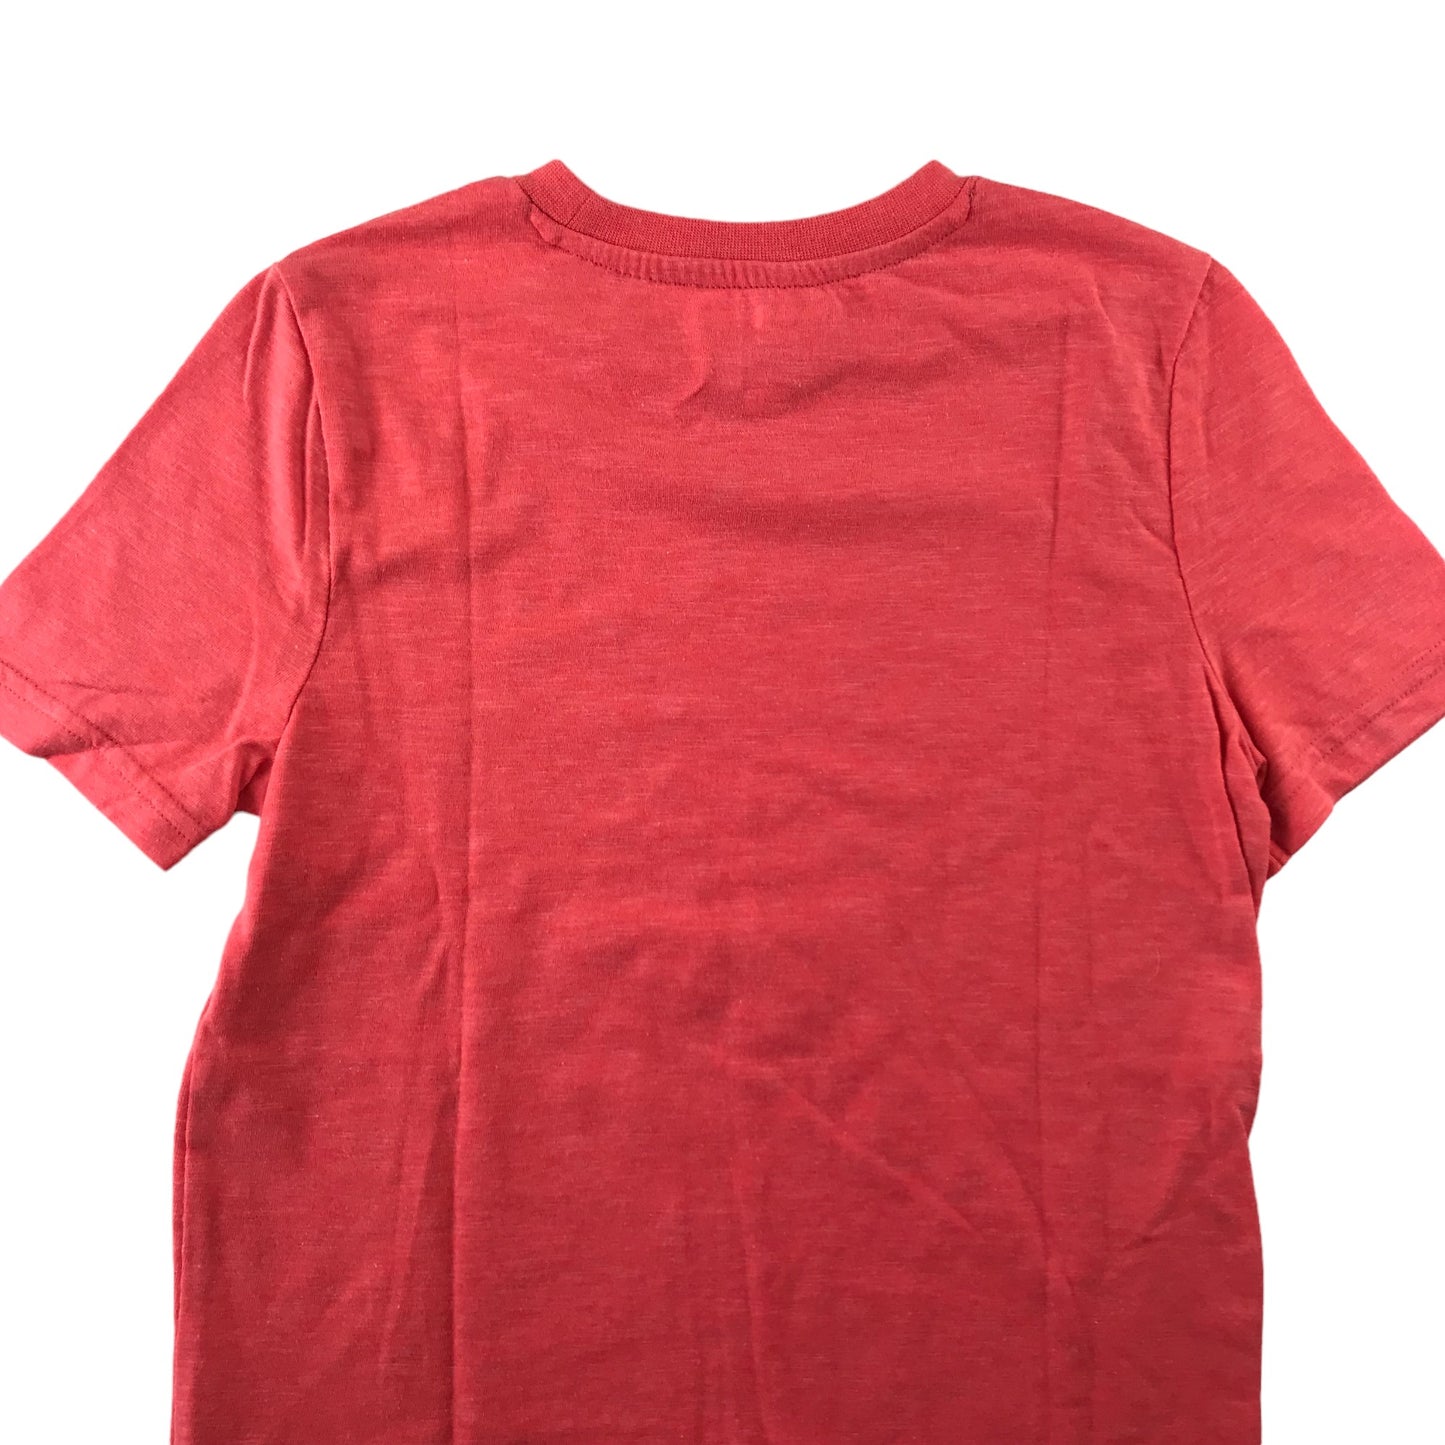 F&F T-shirt 7-8 years red plain gaming new gen